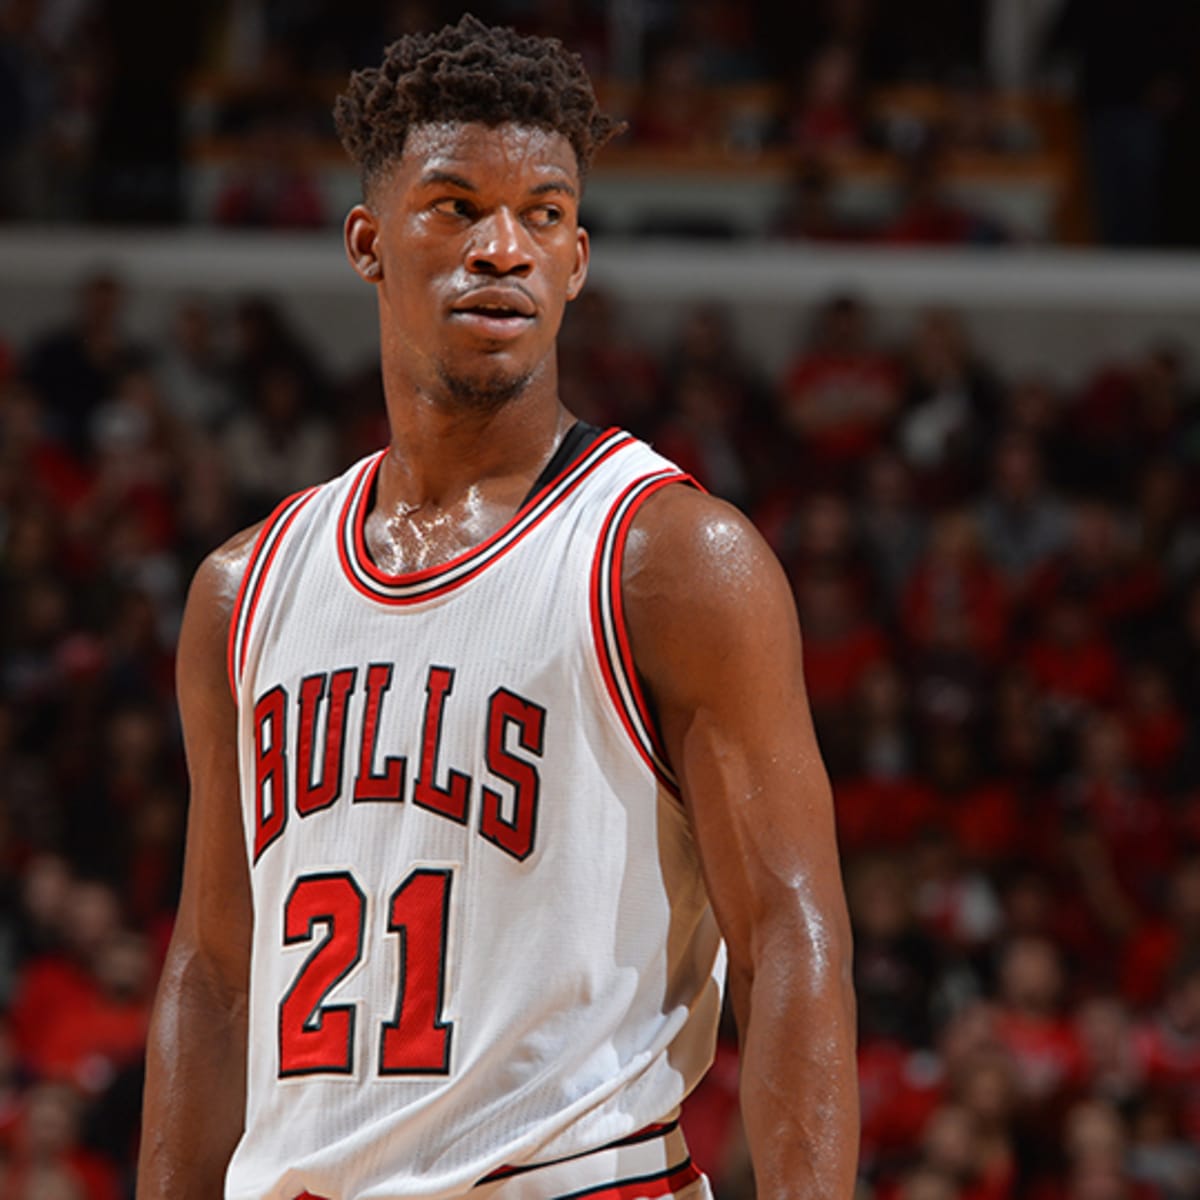 We're going to win the f***ing championship!” - Jimmy Butler